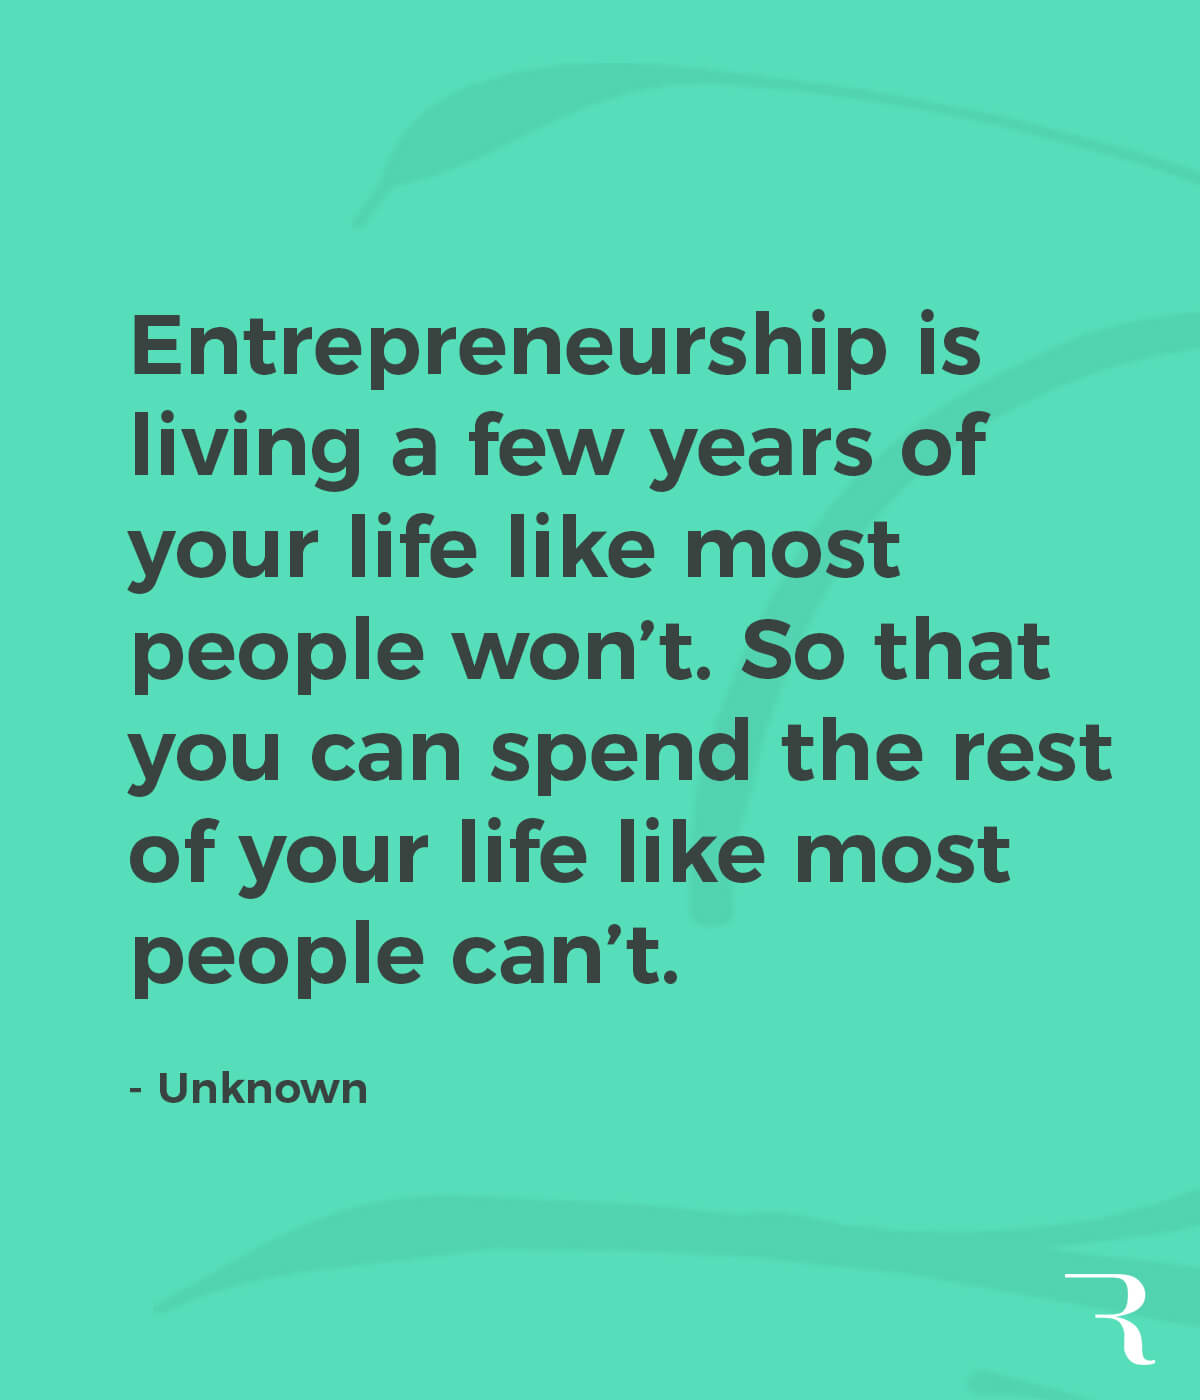 Motivational Quotes: “Live a few years of like most people won’t, so you can spend the rest like most people can’t.” 112 Motivational Quotes to Be a Better Entrepreneur